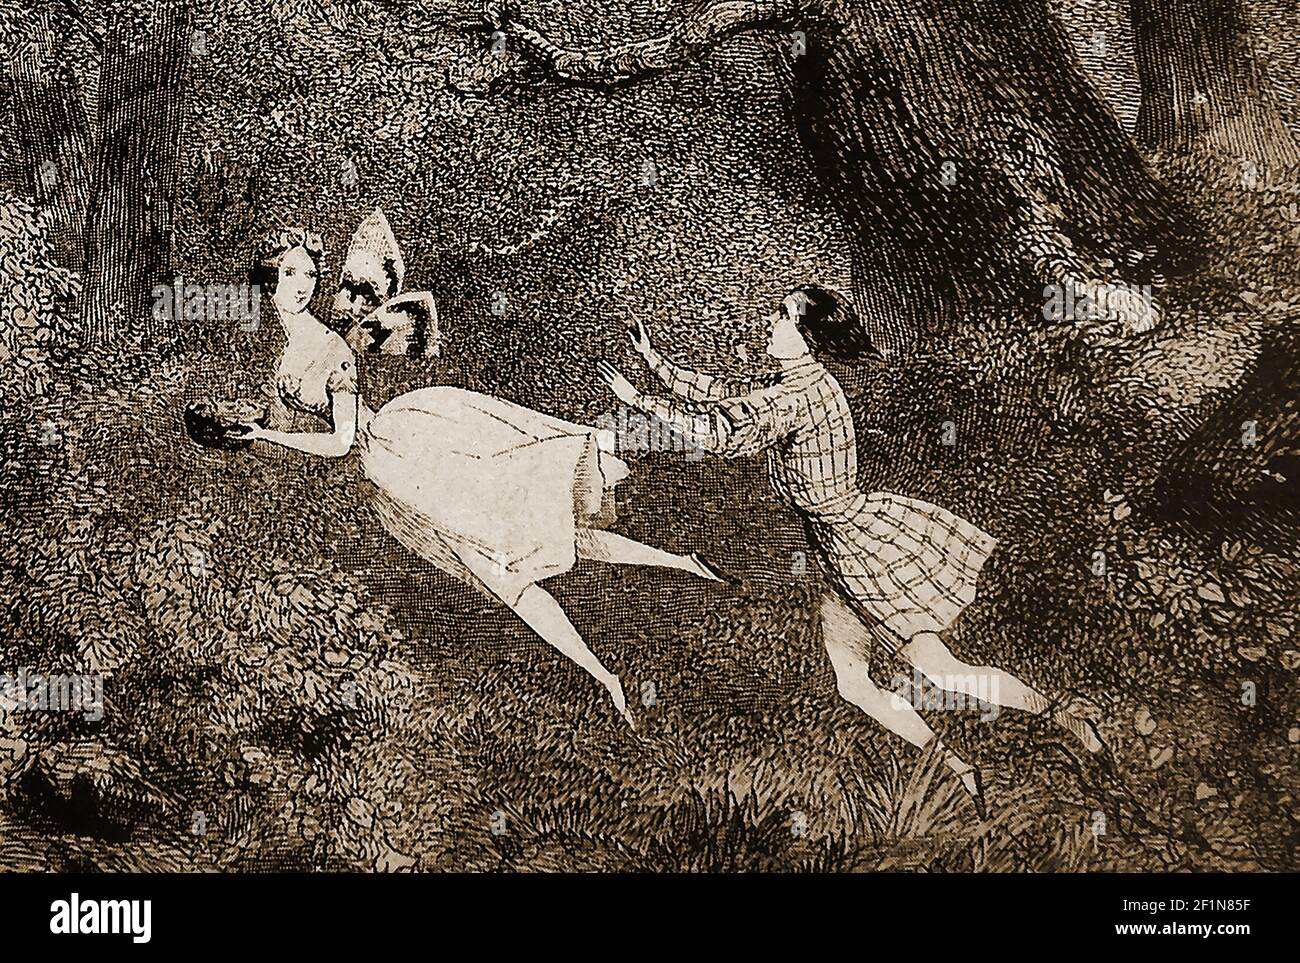 BALLET- An 19th century engraving showing a scene from LA SYLPHIDE Act II.   ---- La Sylphide, also known in Danish as Sylfiden is a romantic ballet in two acts. Two versions are known  the original being choreographed by Filippo Taglioni in 1832, and another choreographed by August Bournonville in 1836. Bournonville's (one of the world's oldest surviving ballets) is the only version known to have survived .  La Sylphide was the first known ballet where dancing en pointe was used for artistic purposes (rather than as an acrobatic demonstration). Stock Photo